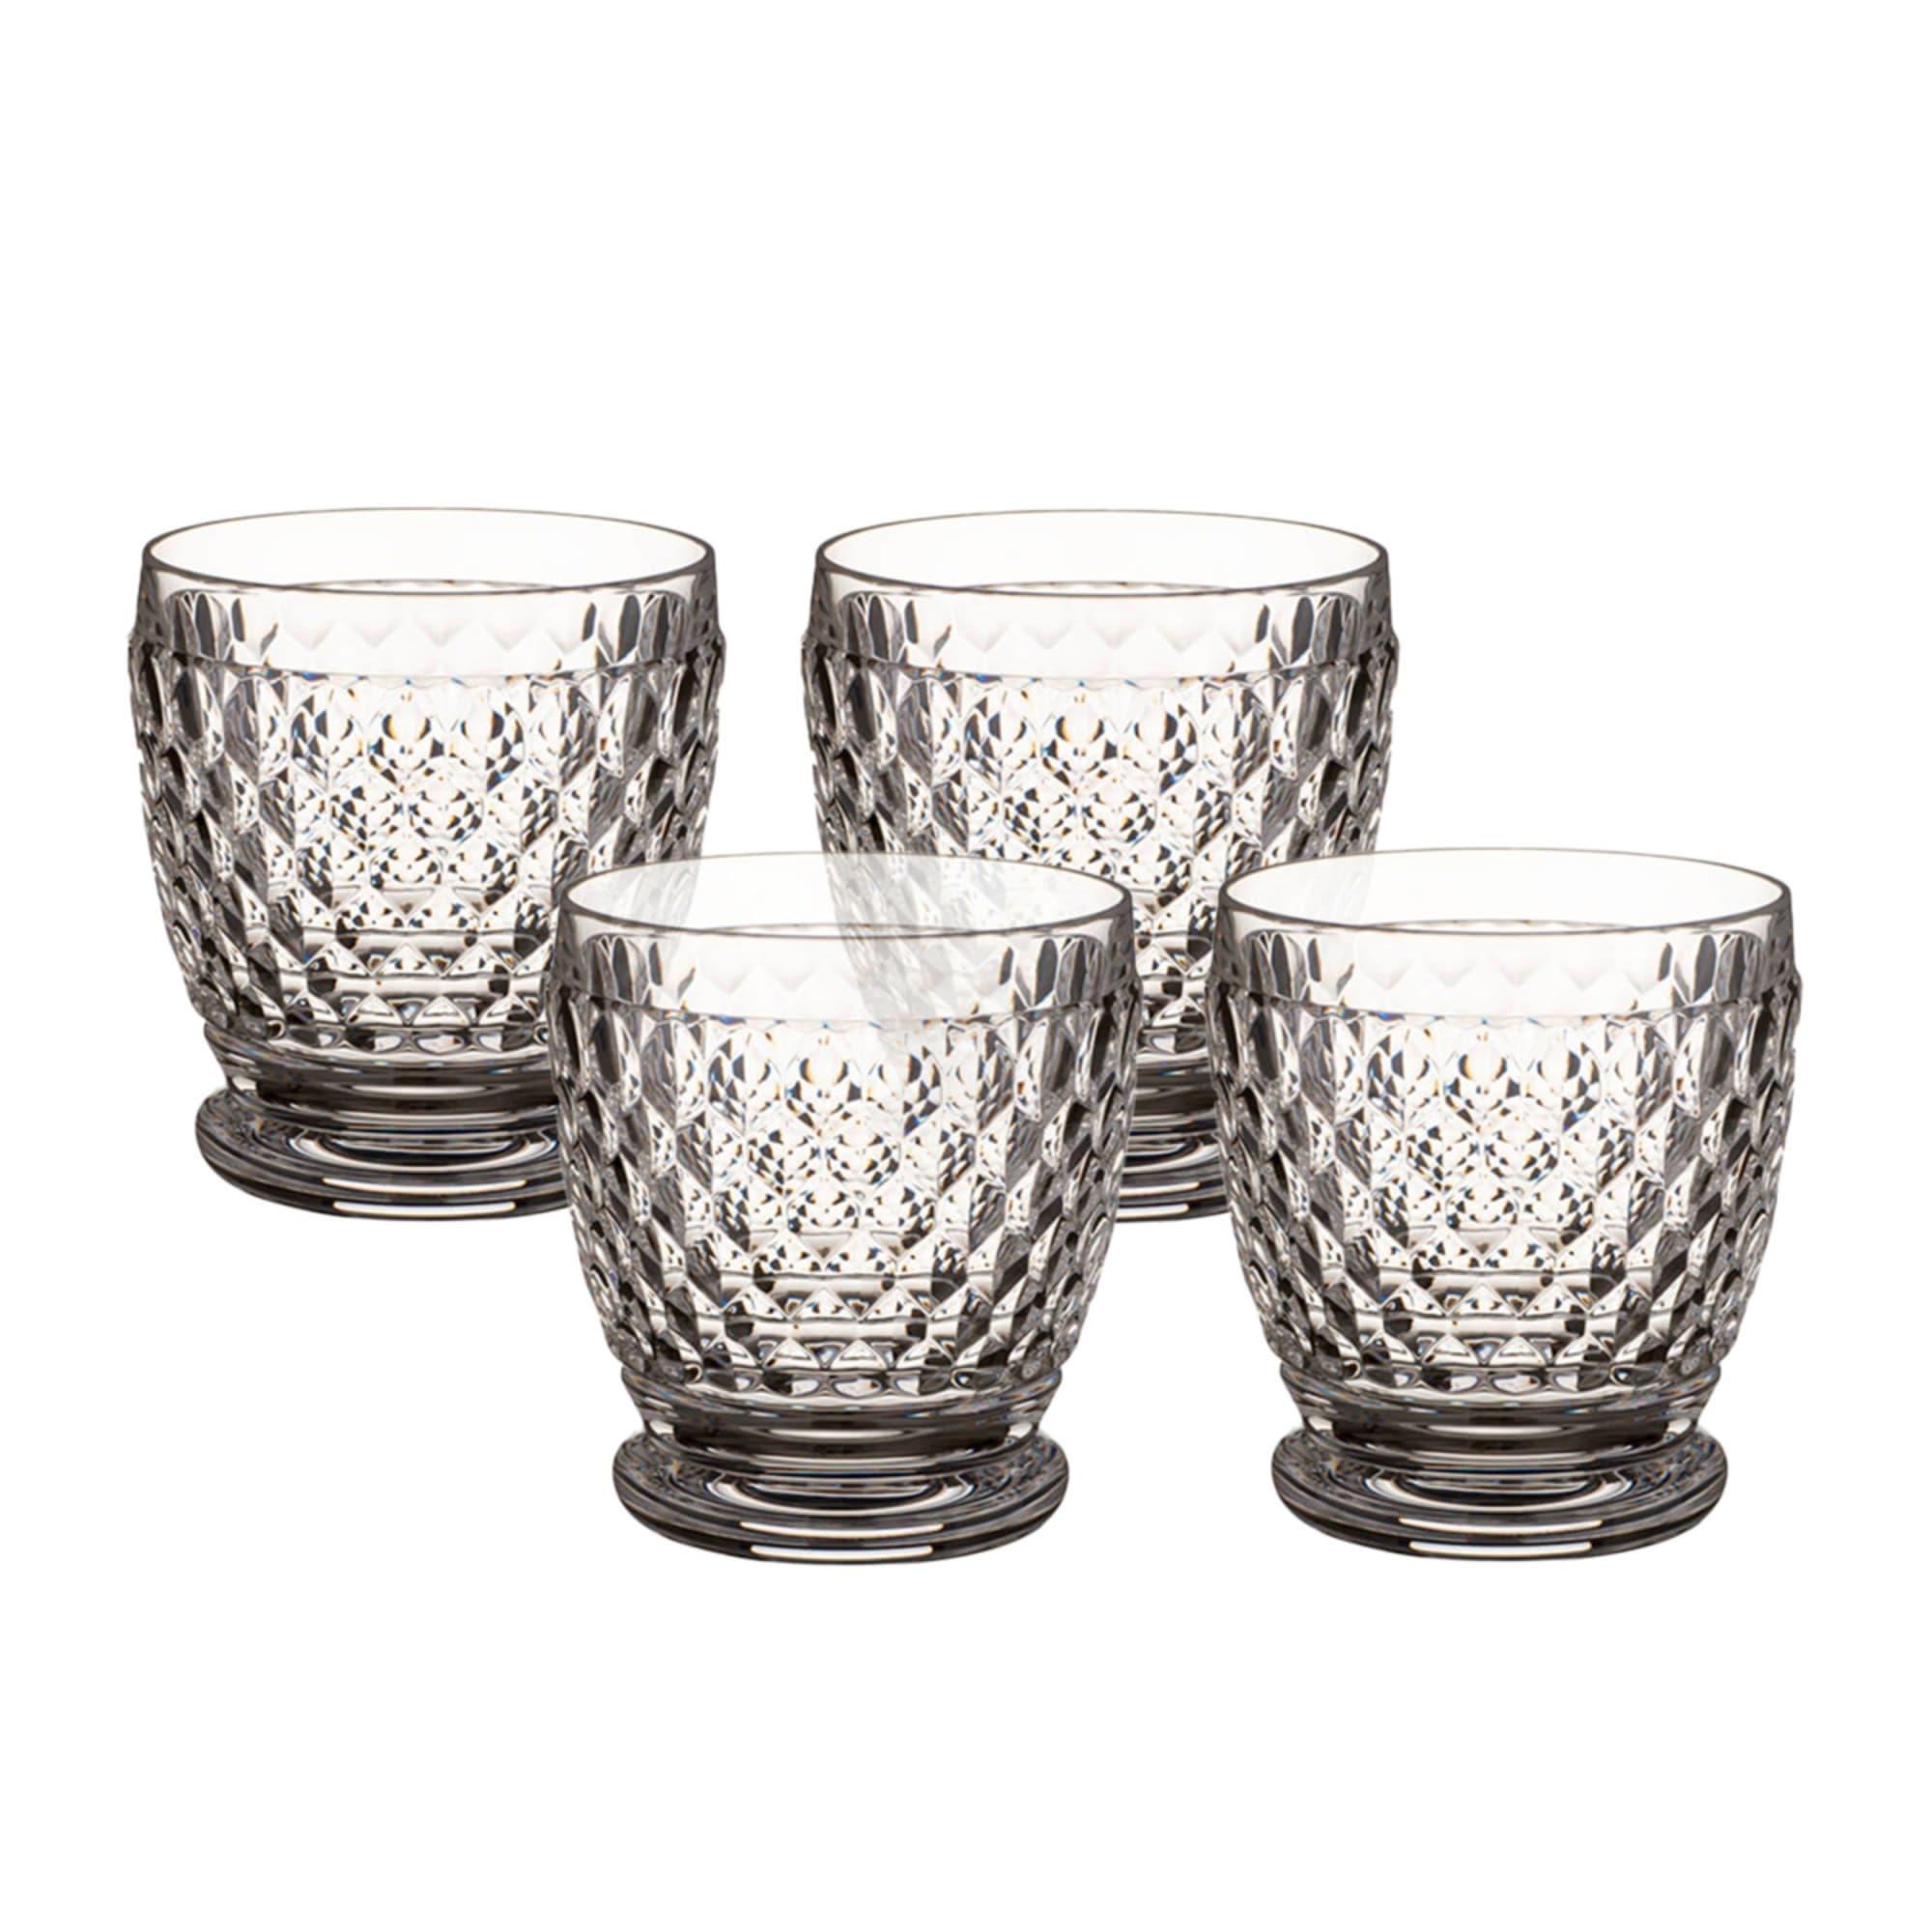 Villeroy & Boch Boston Water and Cocktail Tumbler 330ml Set of 4 Image 1